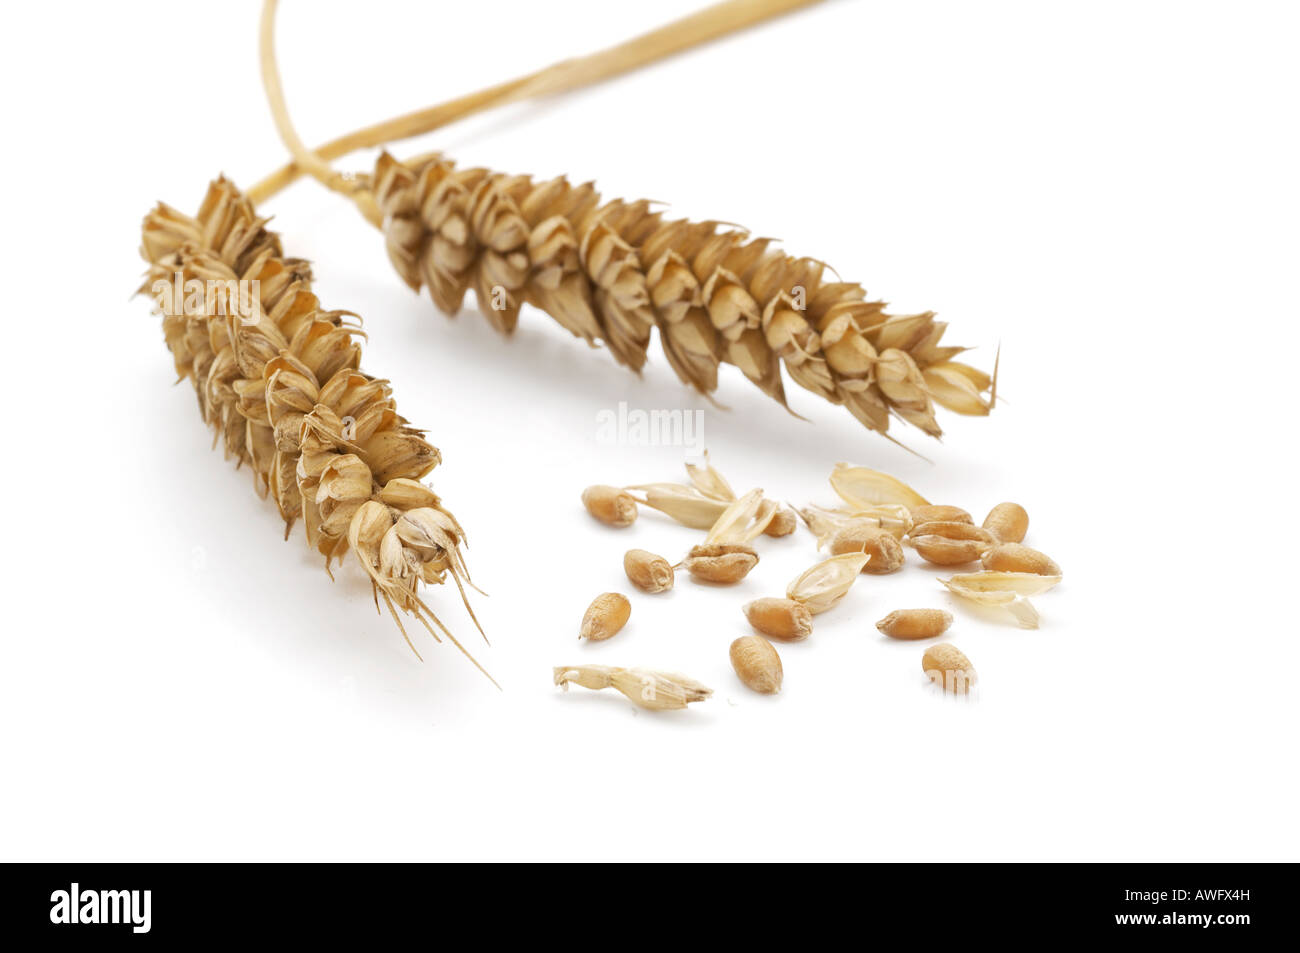 two ears of wheat with separate grains and chaff Stock Photo